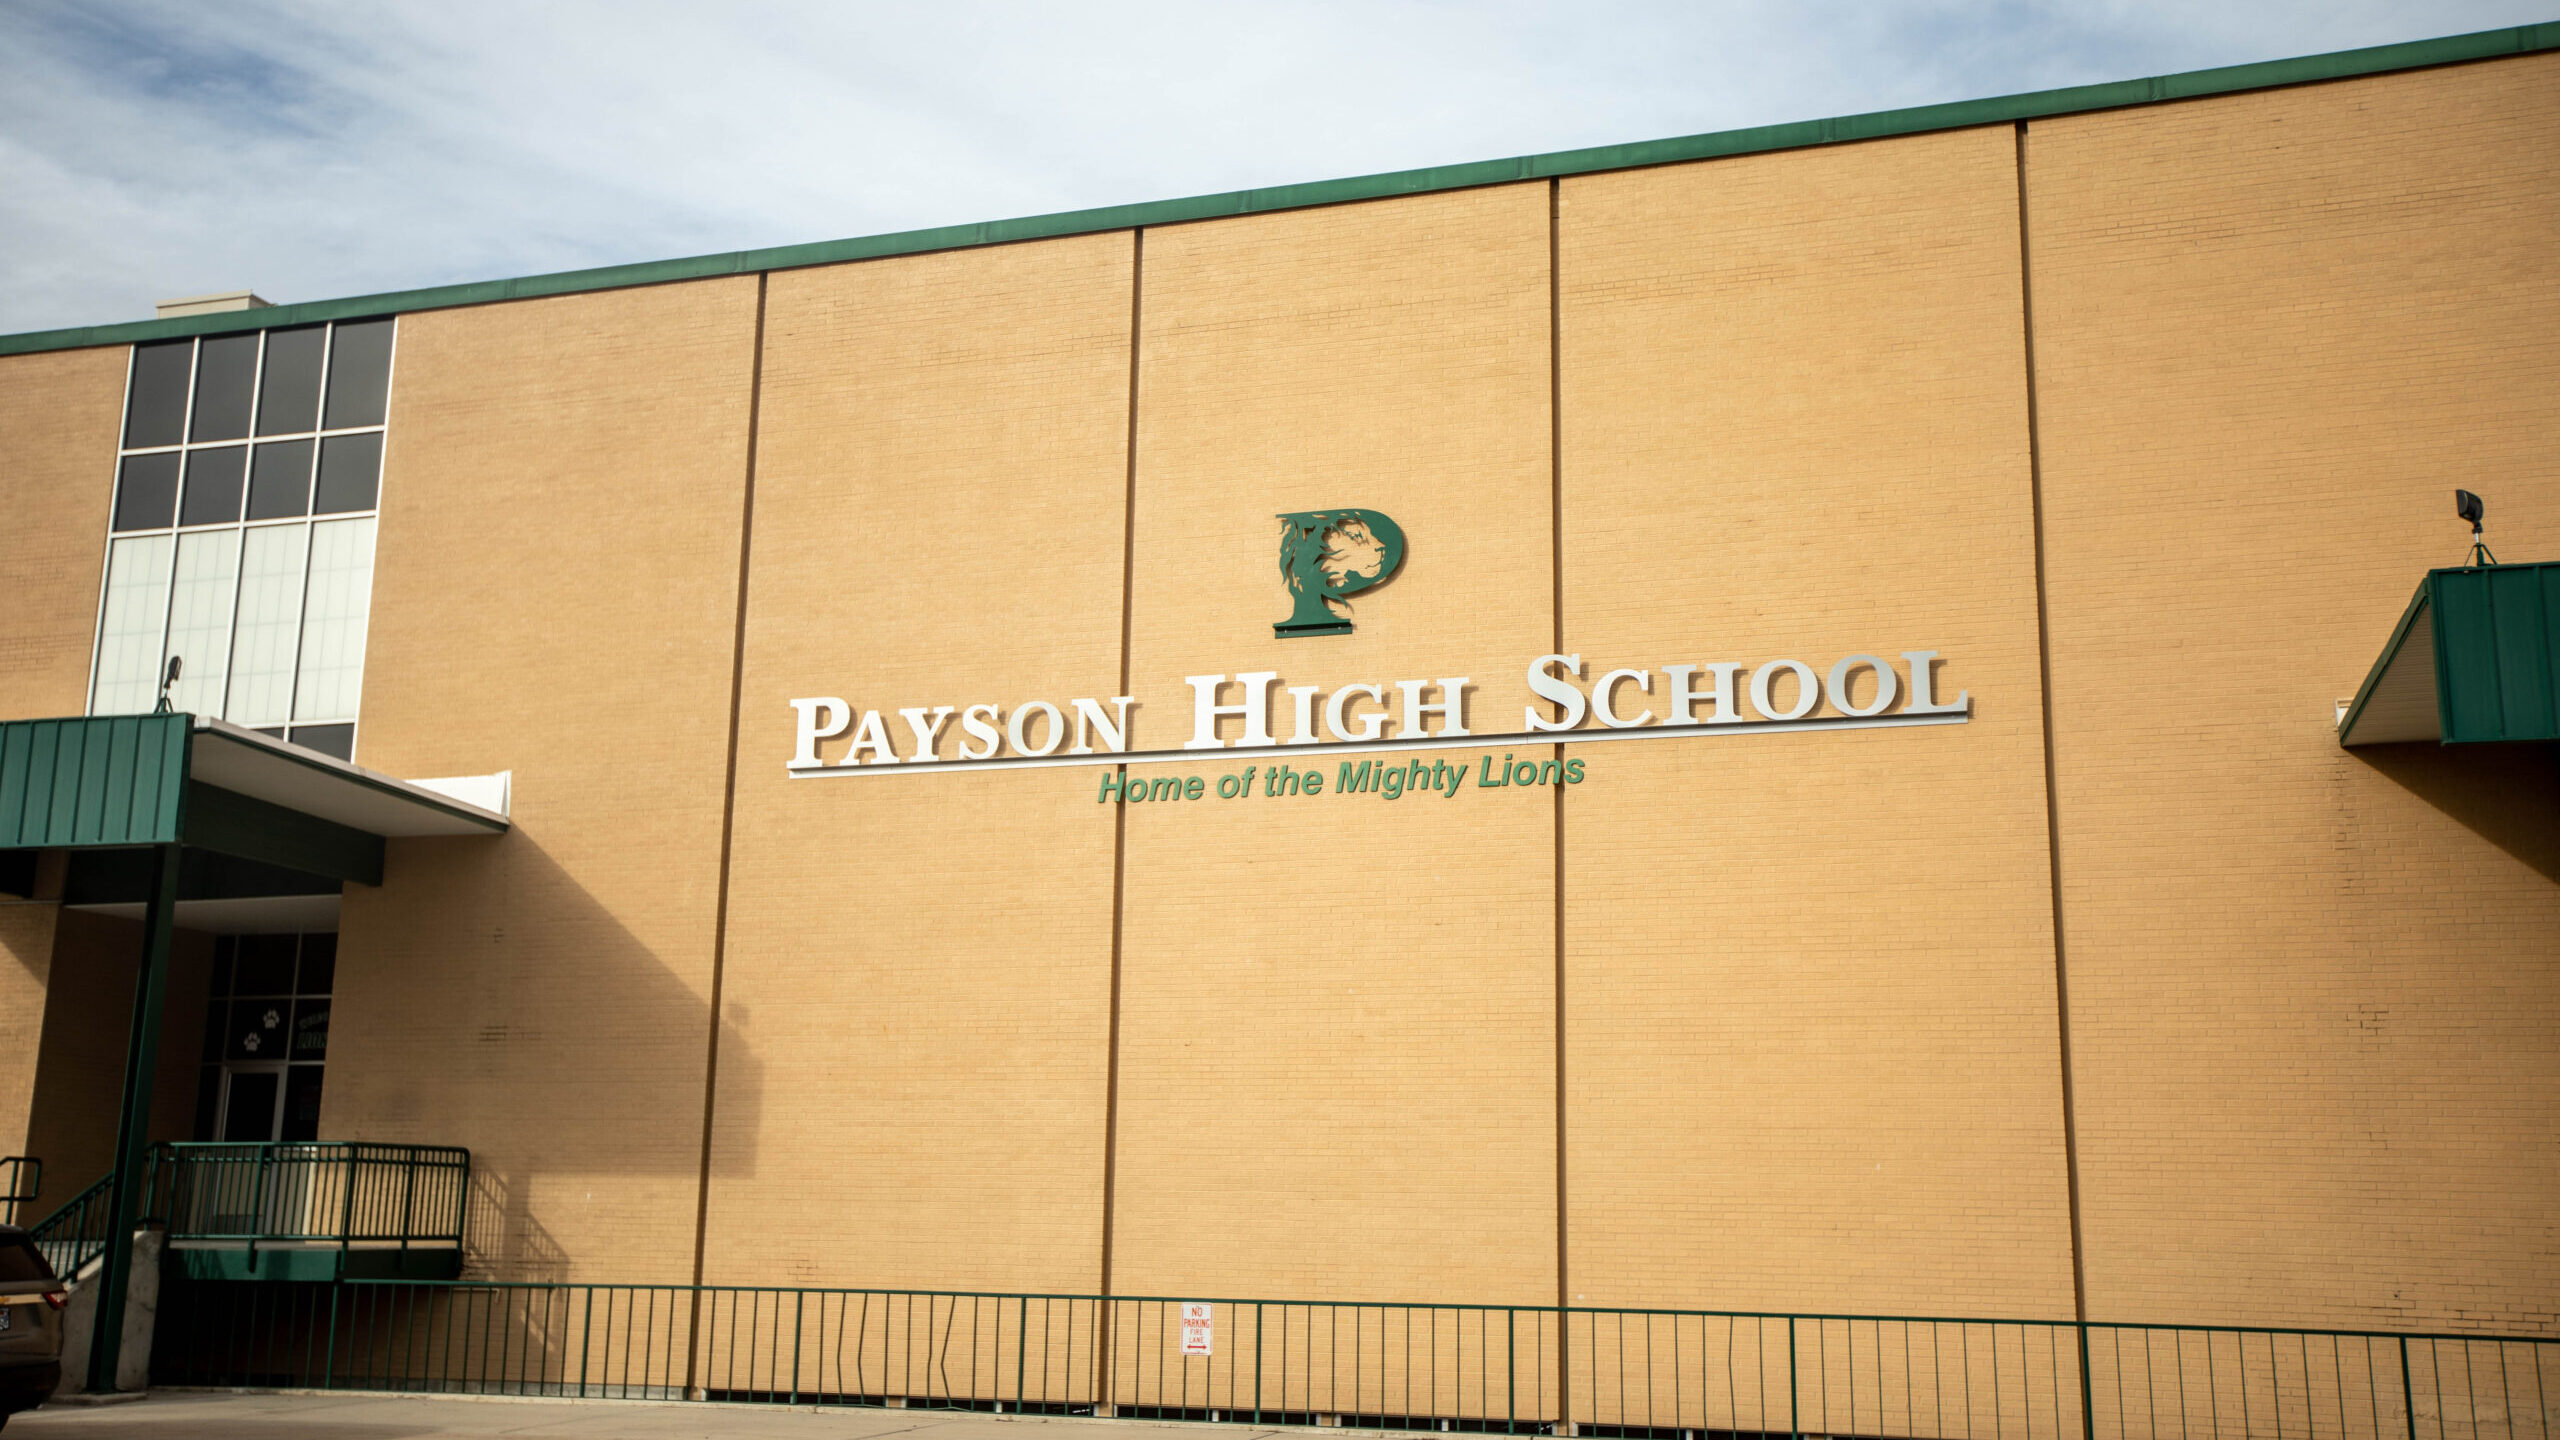 Students at Payson High School are kicking off a massive year-long campaign to get "Footloose" star...